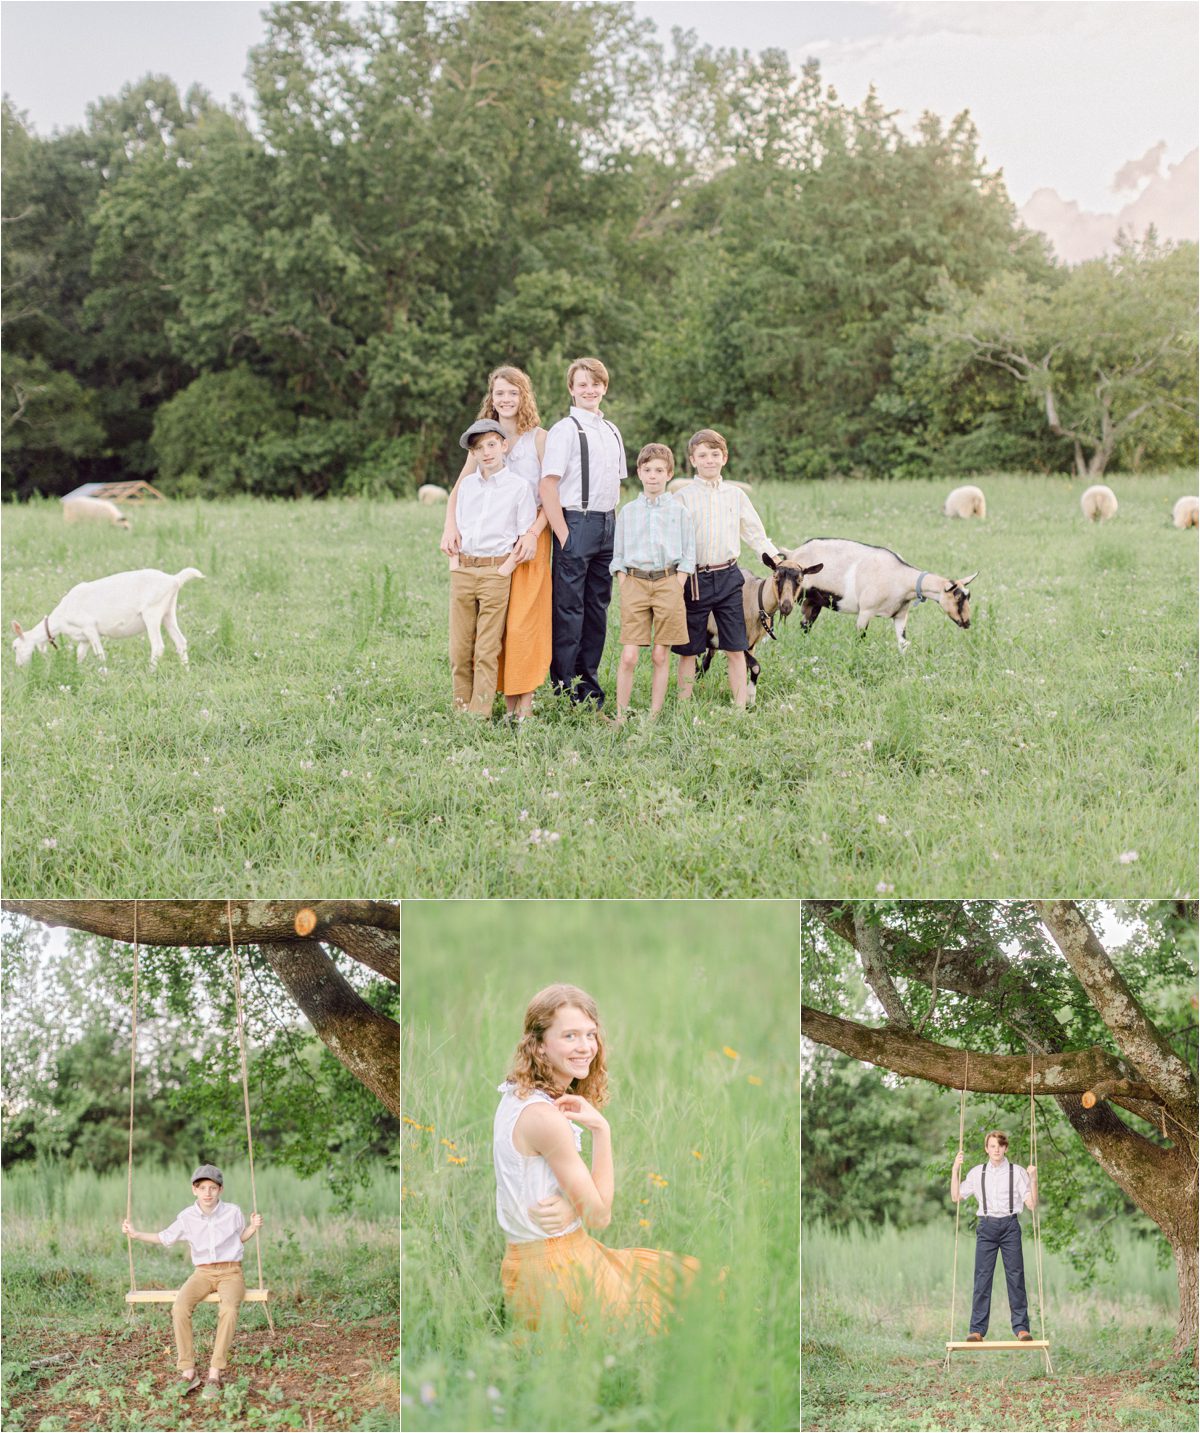 Sibling portraits taken on farm by Athens, GA outdoor family photographer